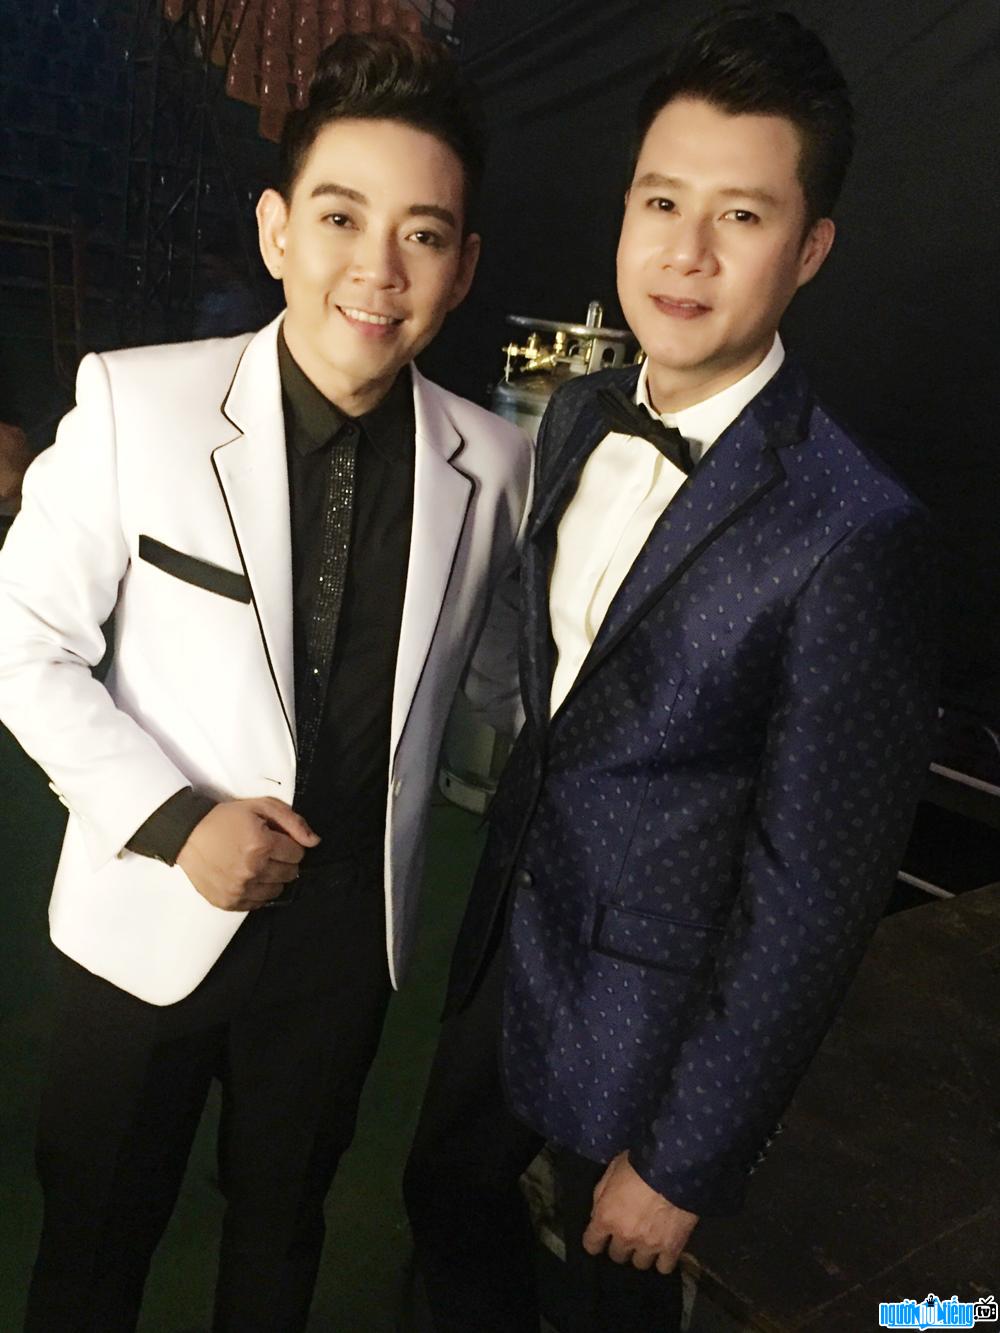  Ca Singer Doan Viet Phuong with singer coach Quang Dung in the program Who will become a star